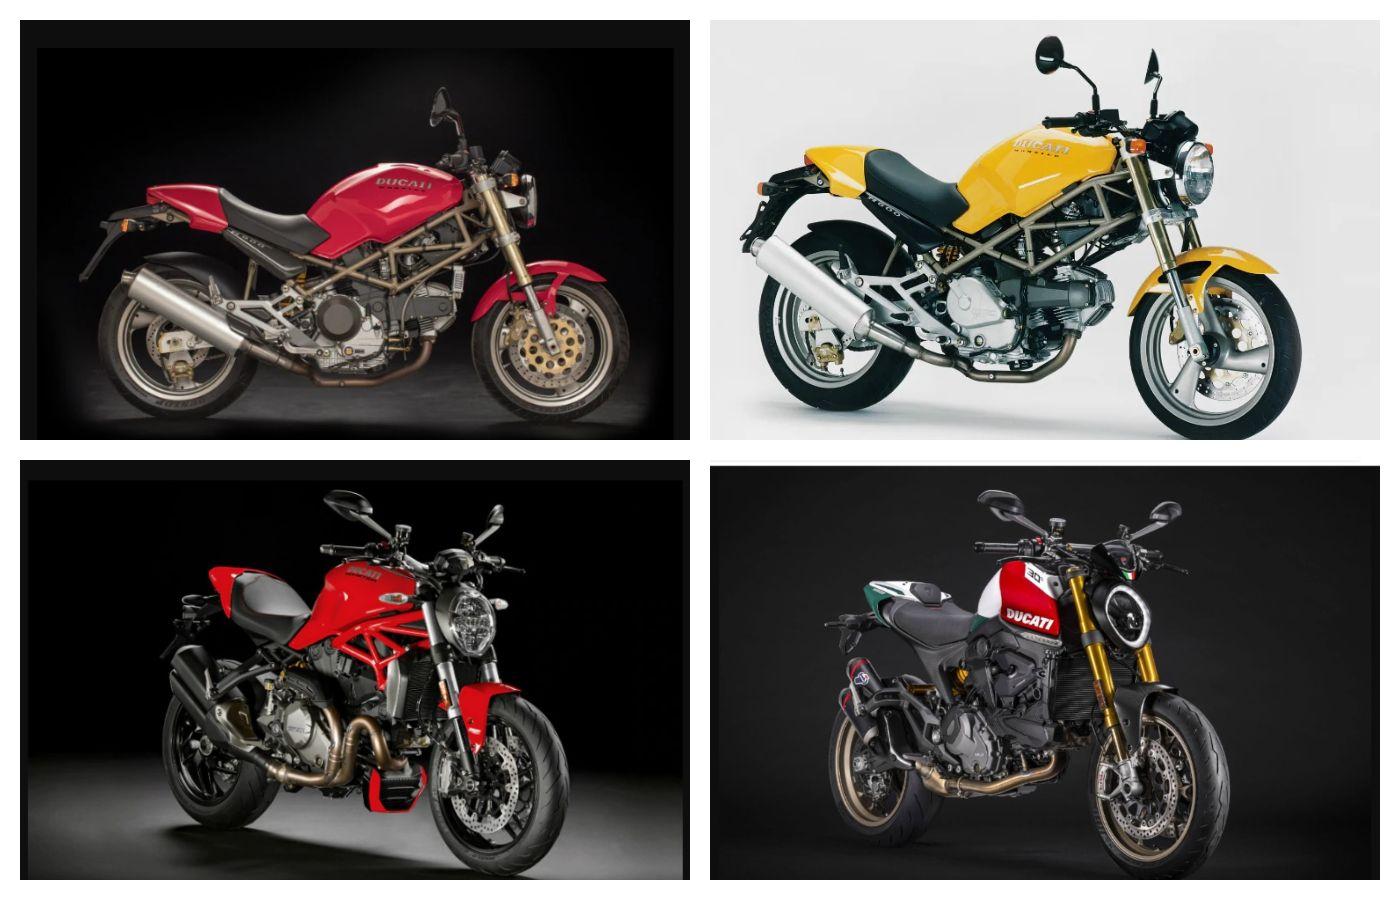 We take a look at 30 years of the Ducati Monster's history - a bike which not only saved Ducati from imminent bankruptcy, but also led to the development of the naked streetfighter segment of motorcycles as we know it today.